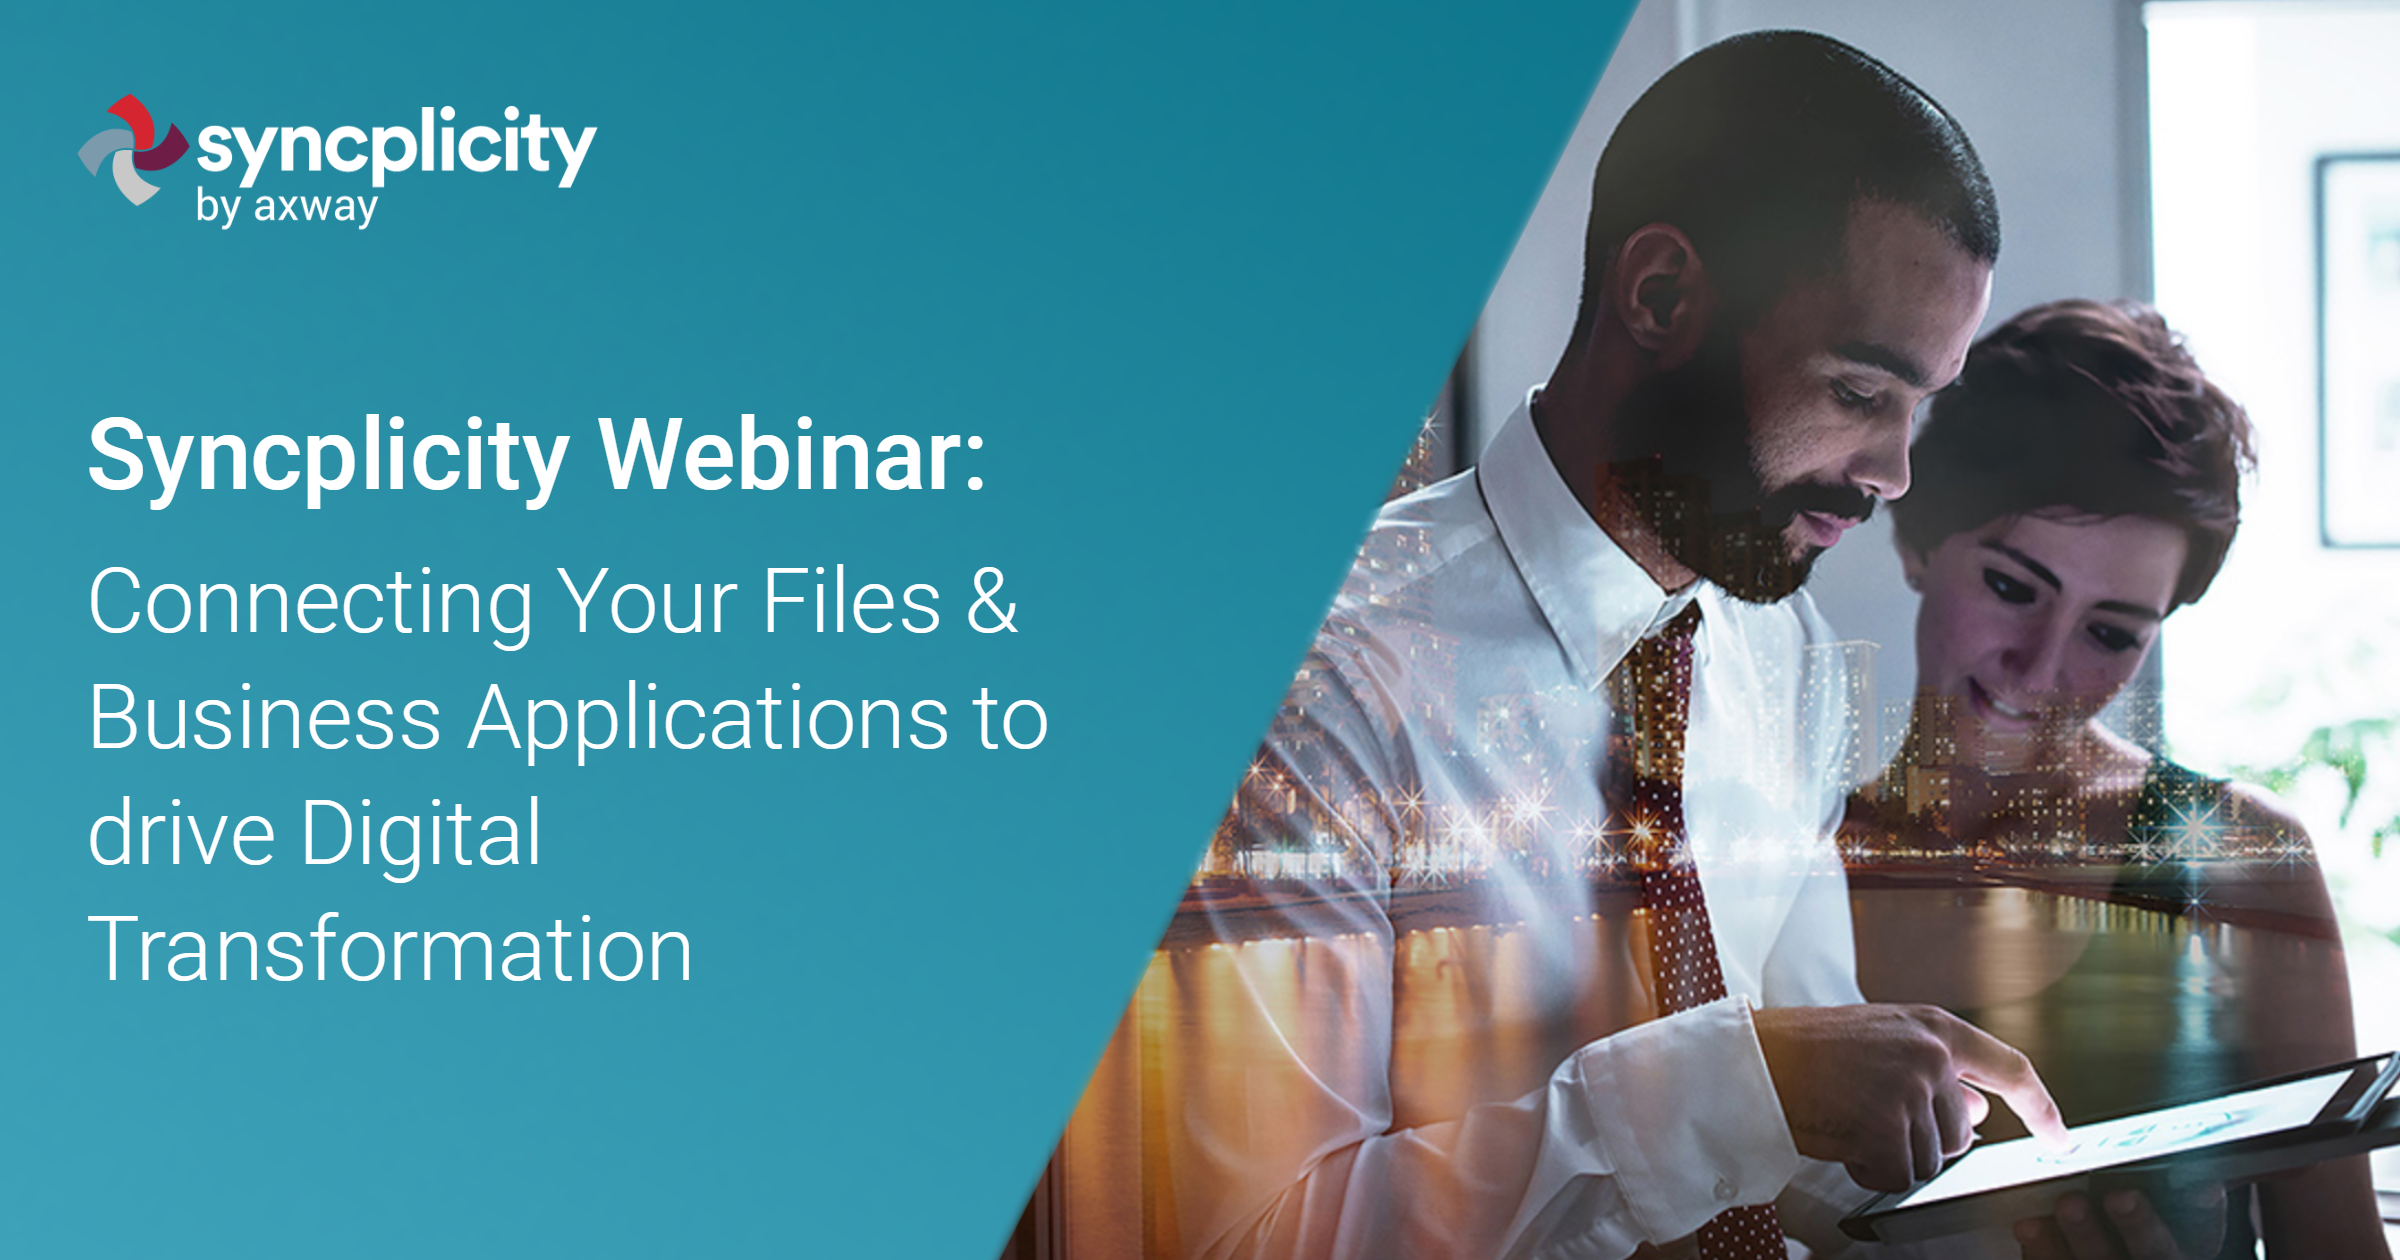 Content Collaboration: Connecting your files and business applications to drive digital transformation